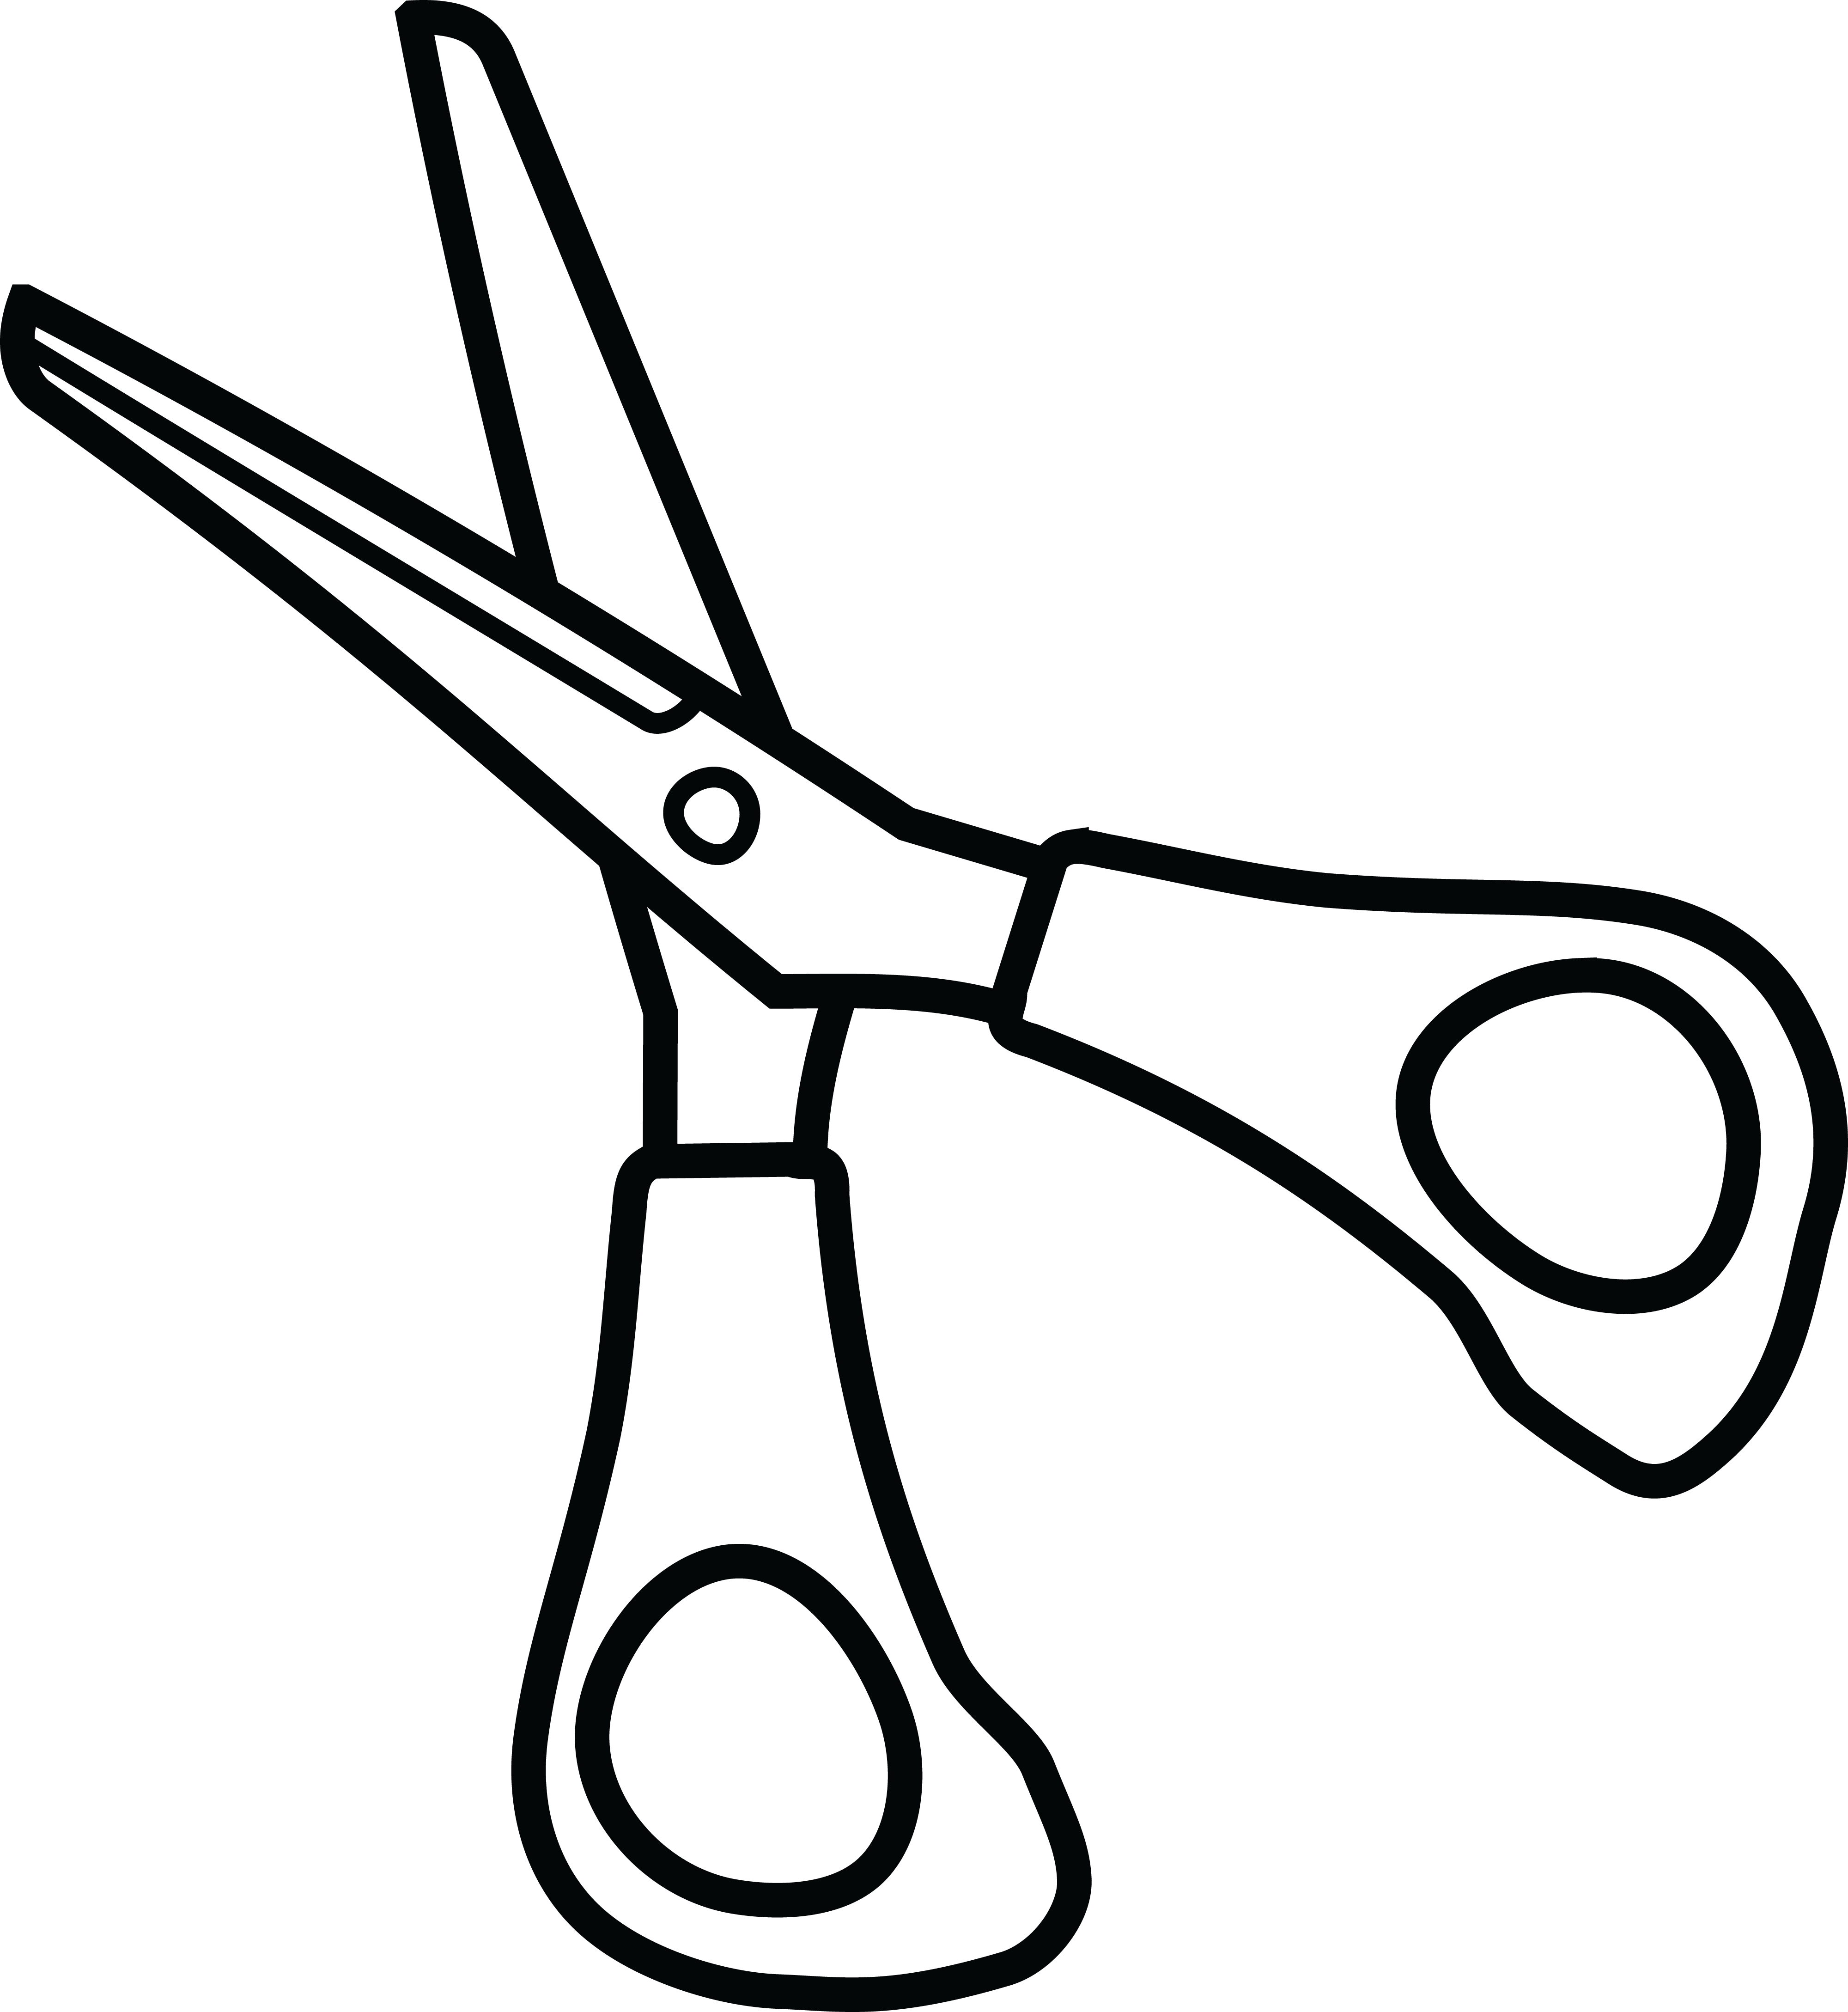 Collection of free cessor. Shears clipart sewing accessory